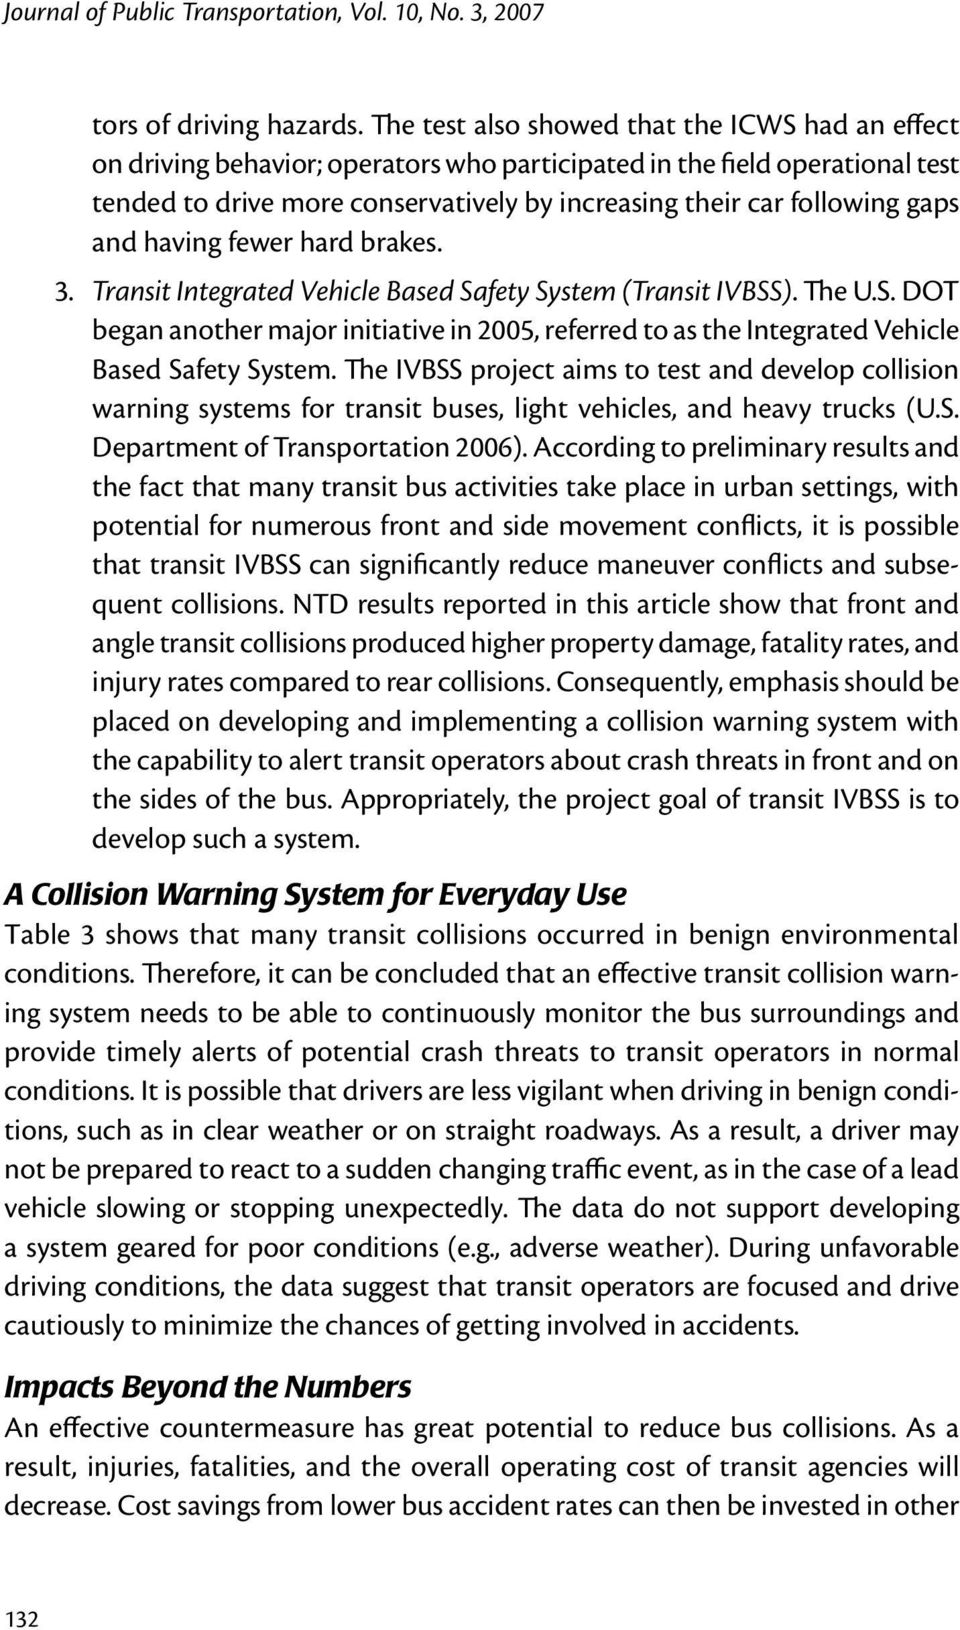 gaps and having fewer hard brakes. 3. Transit Integrated Vehicle Based Safety System (Transit IVBSS). The U.S. DOT began another major initiative in 2005, referred to as the Integrated Vehicle Based Safety System.